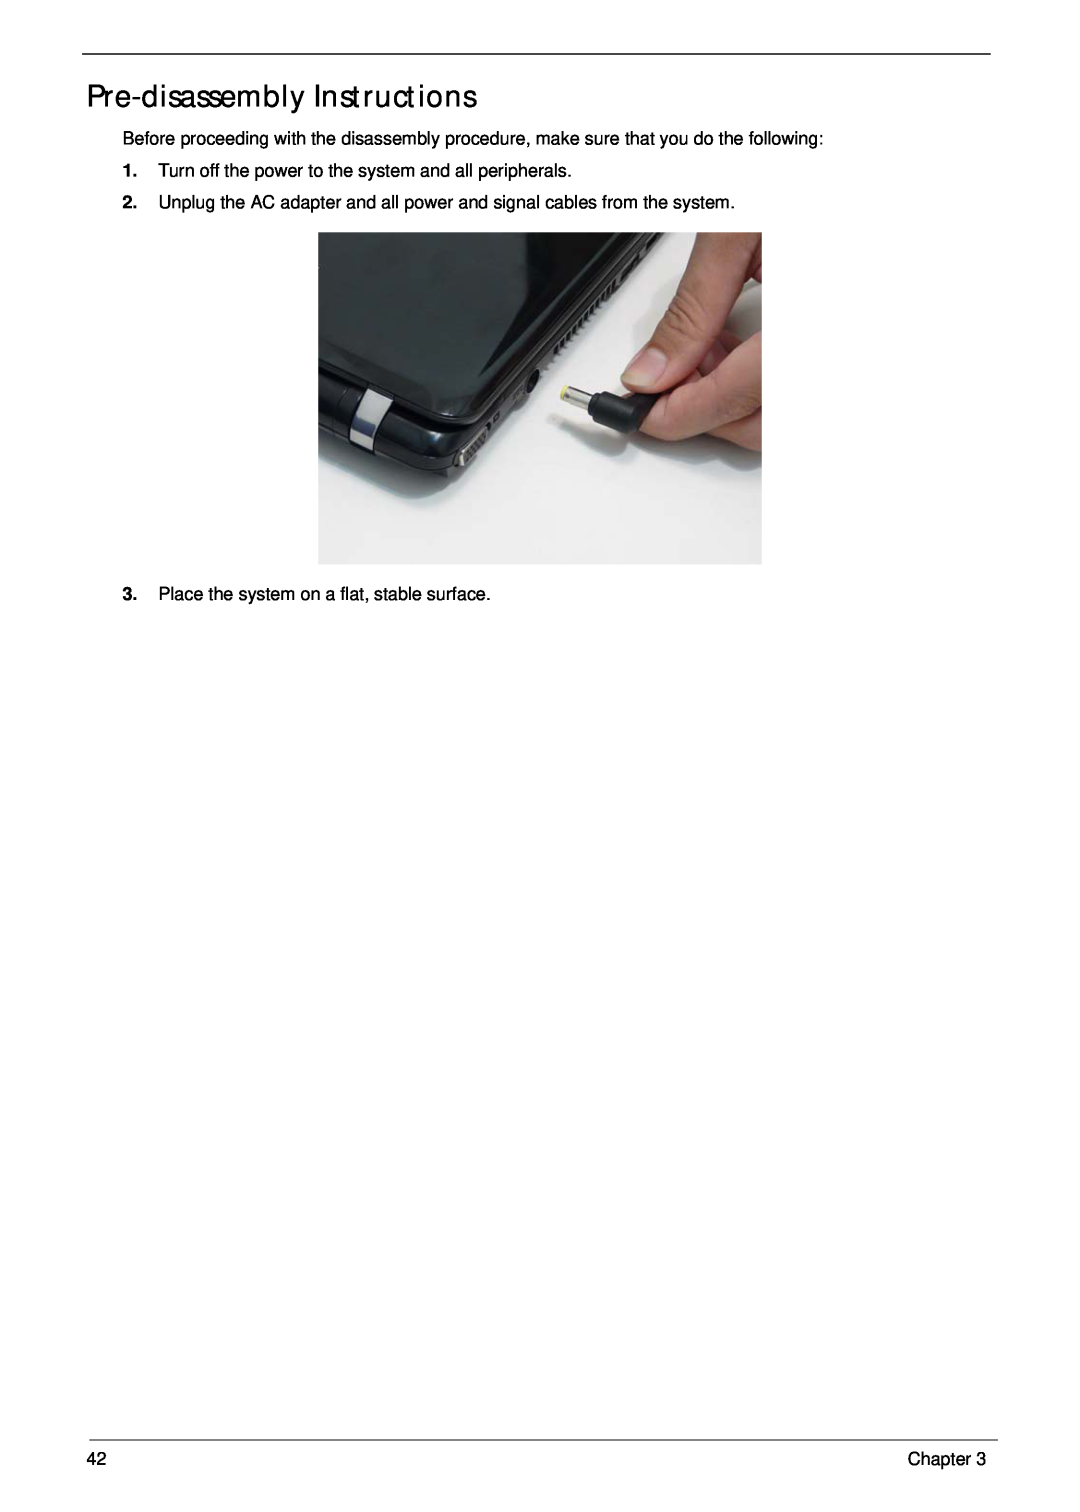 Gateway EC14 manual Pre-disassembly Instructions, Turn off the power to the system and all peripherals 